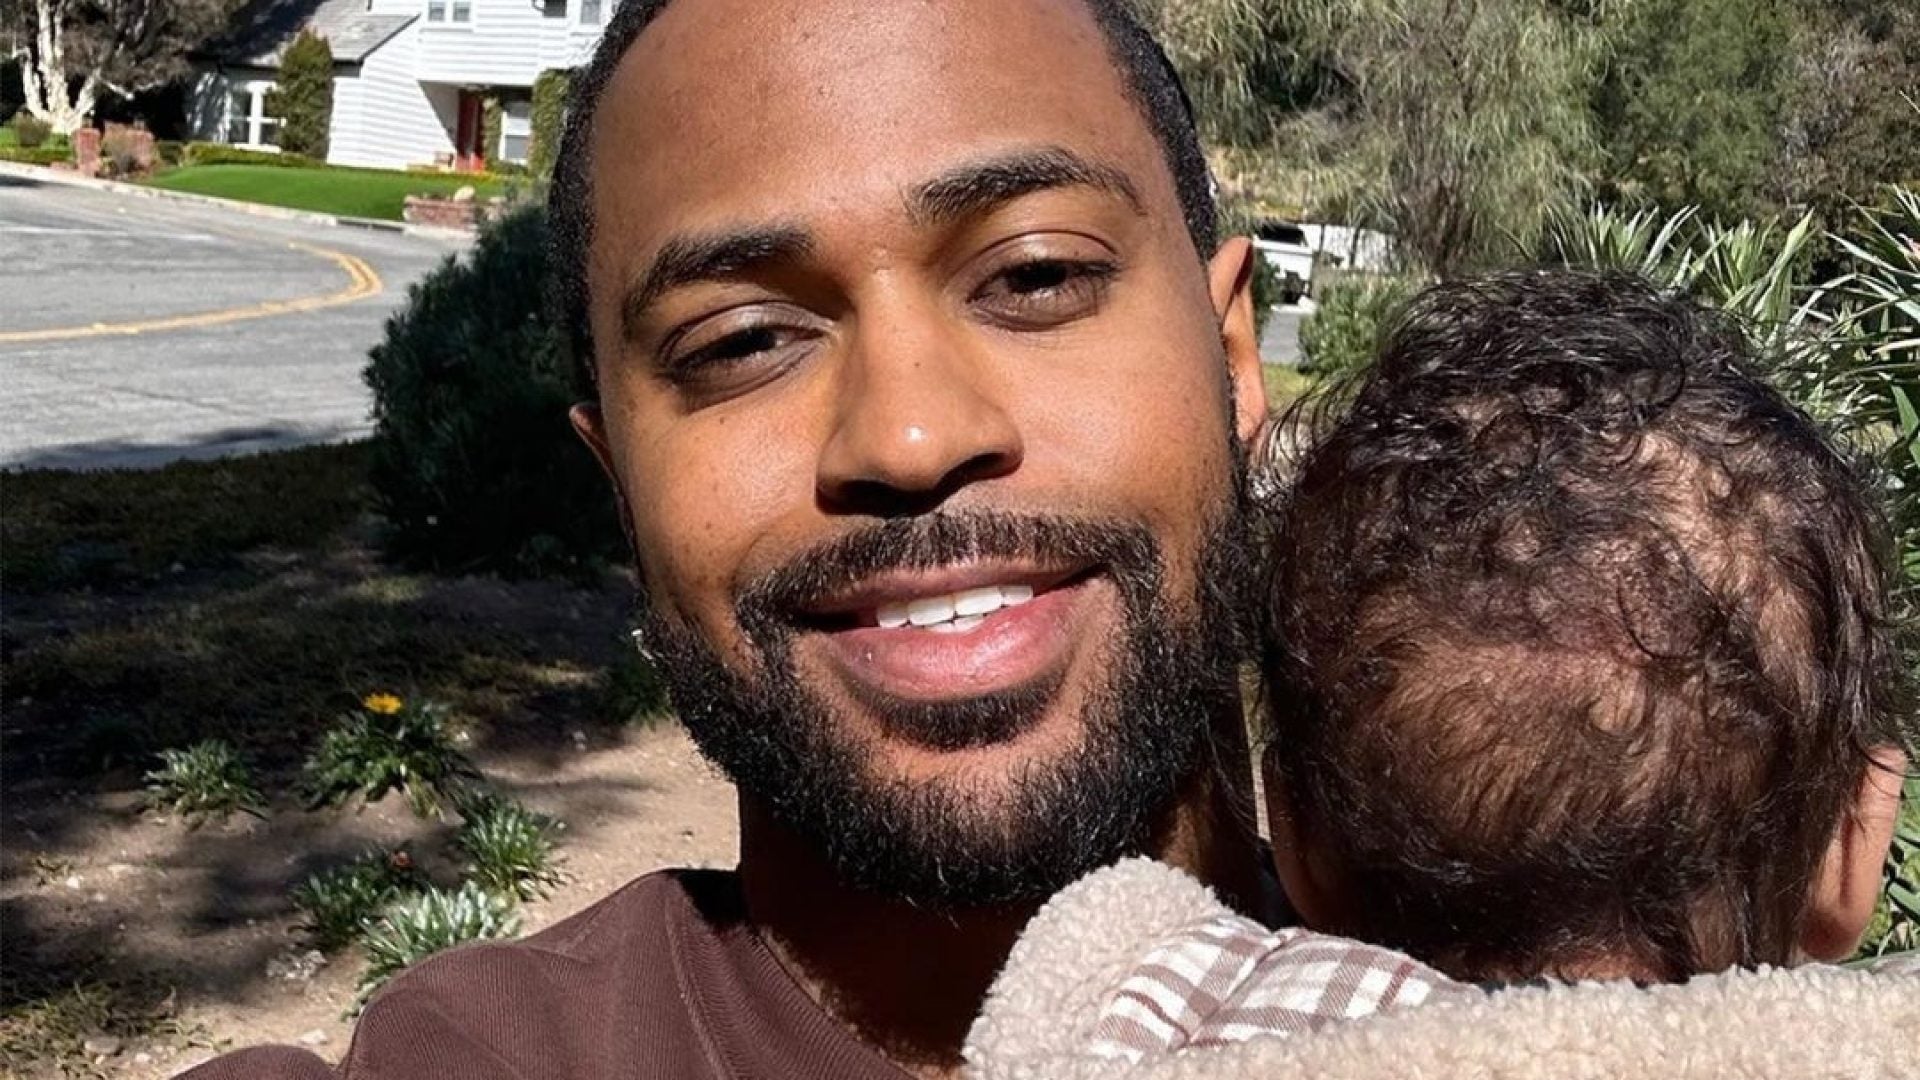 Dads On Duty: 8 Celeb Dads Spending Quality Time With Their Minis